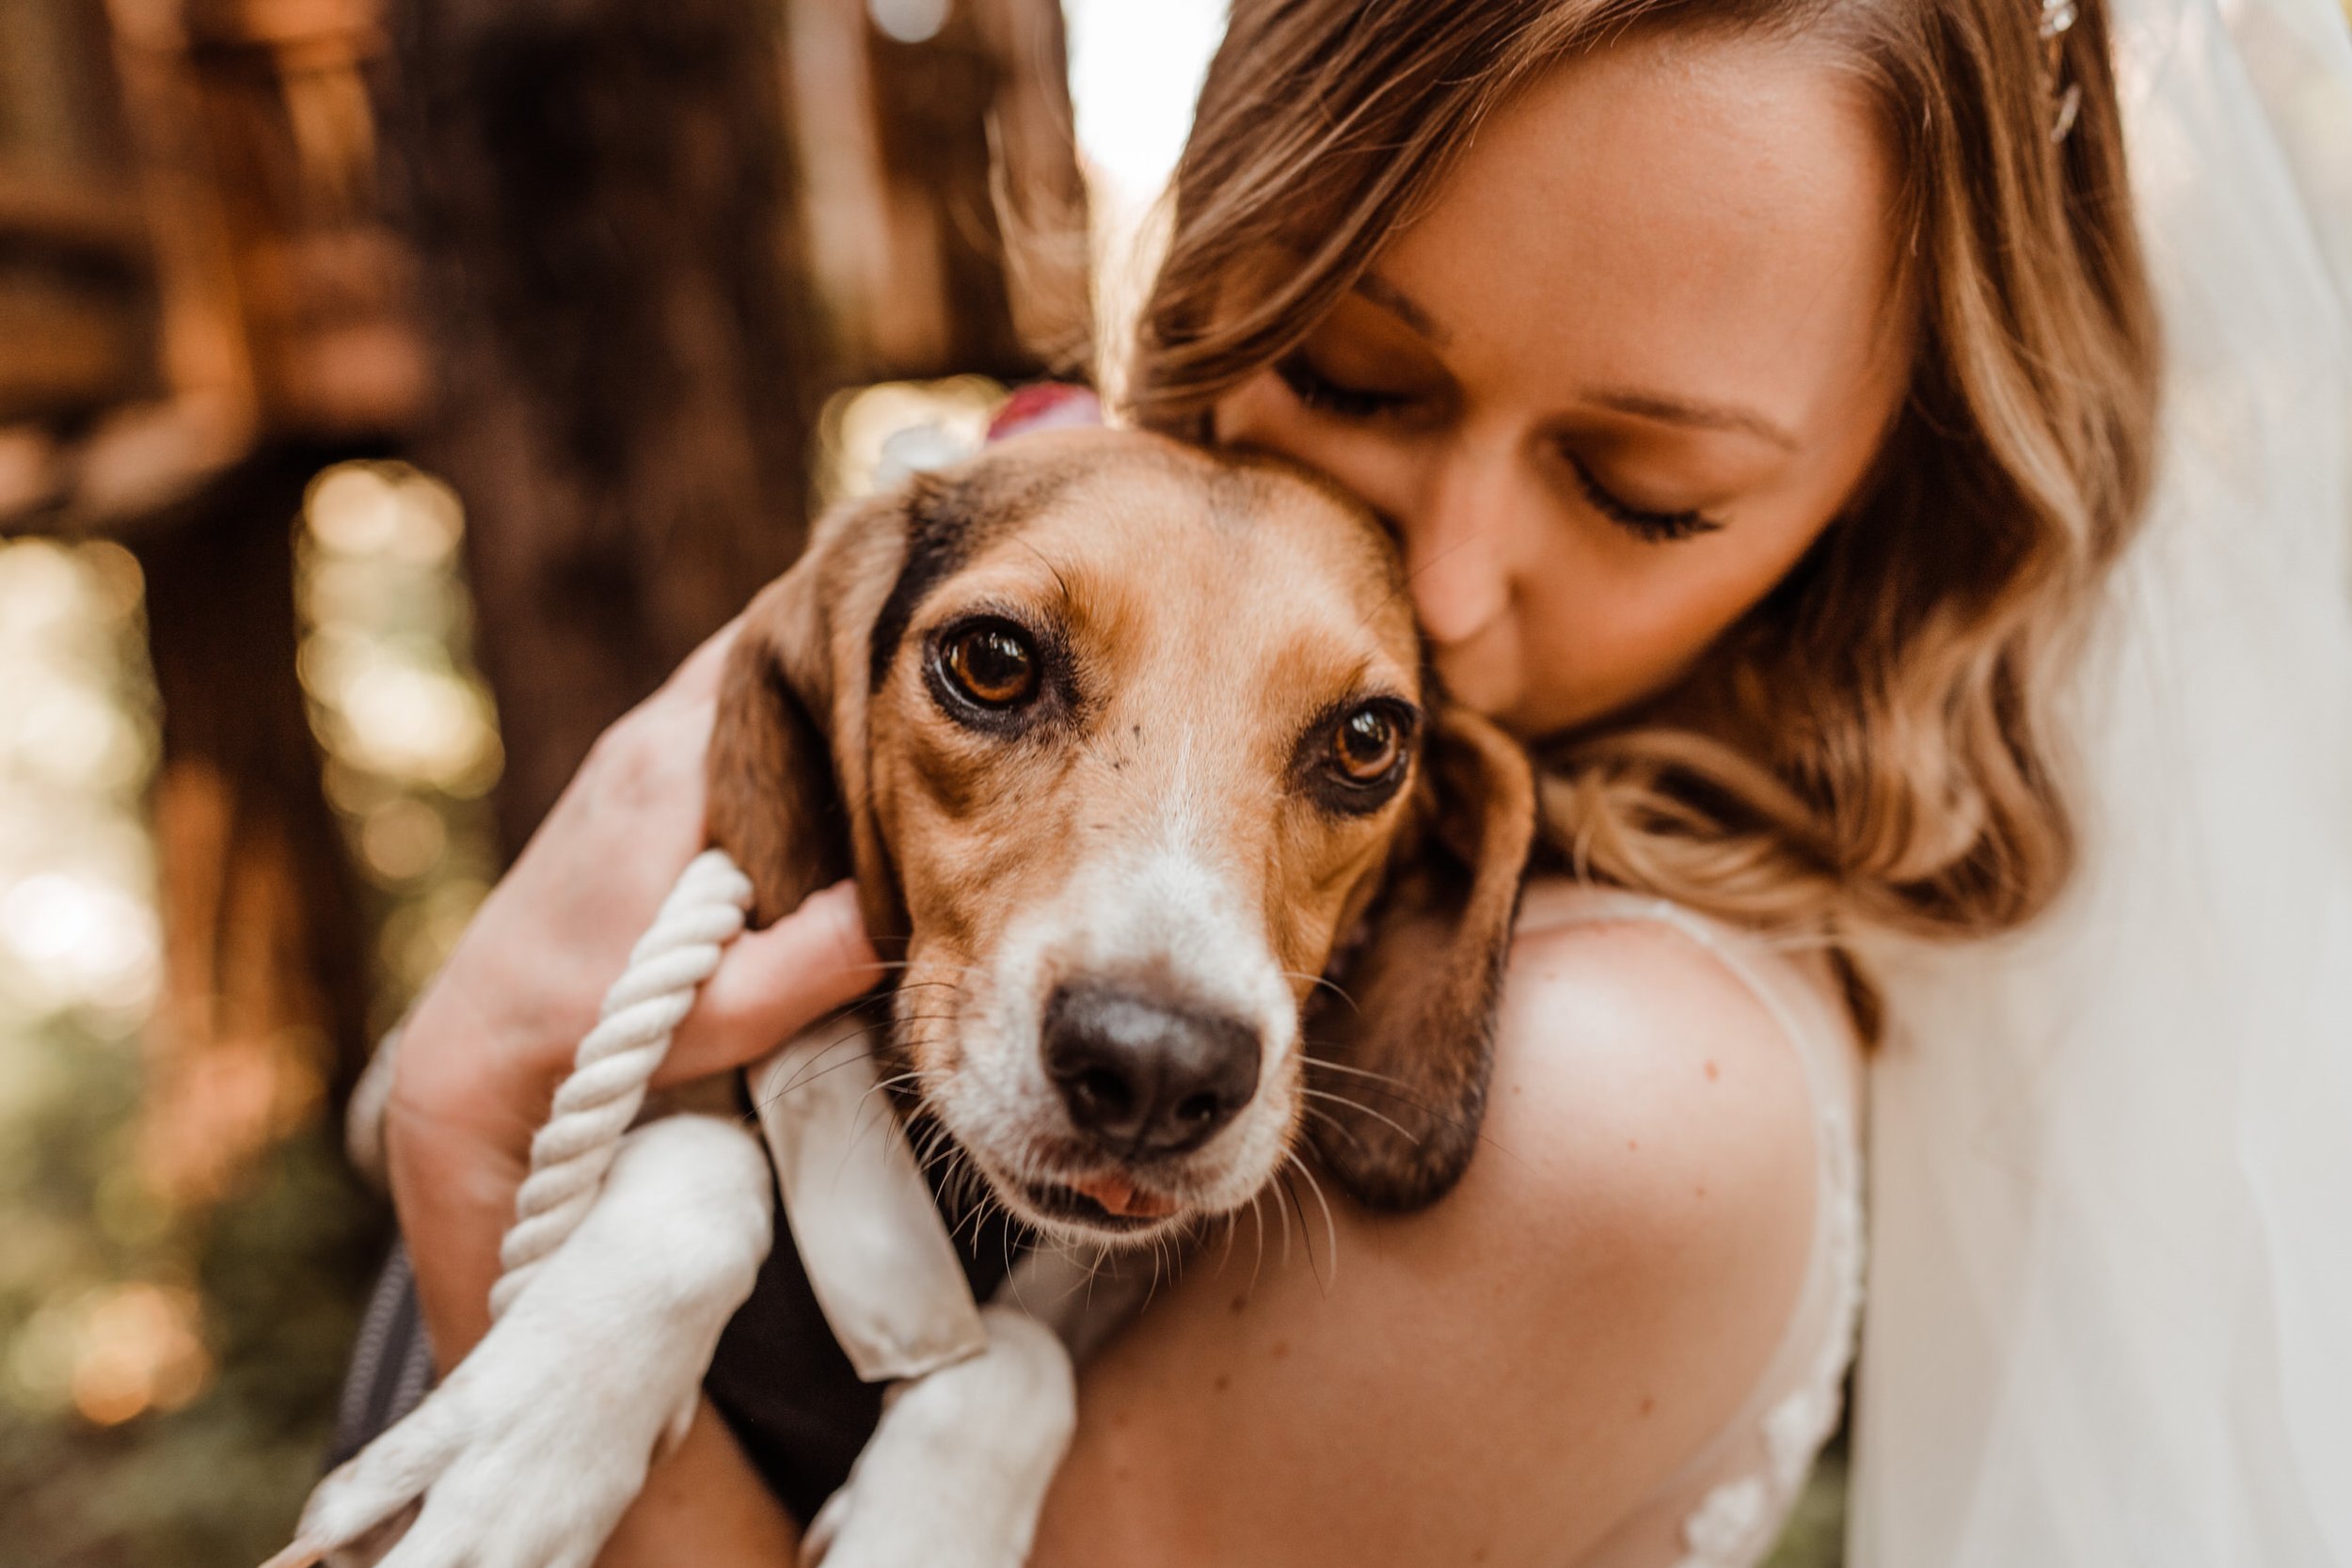 Wedding-in-the-Woods-Bride-with-Rescue-Beagle-Bridesmaid-Dog-of-Honor (1).jpg